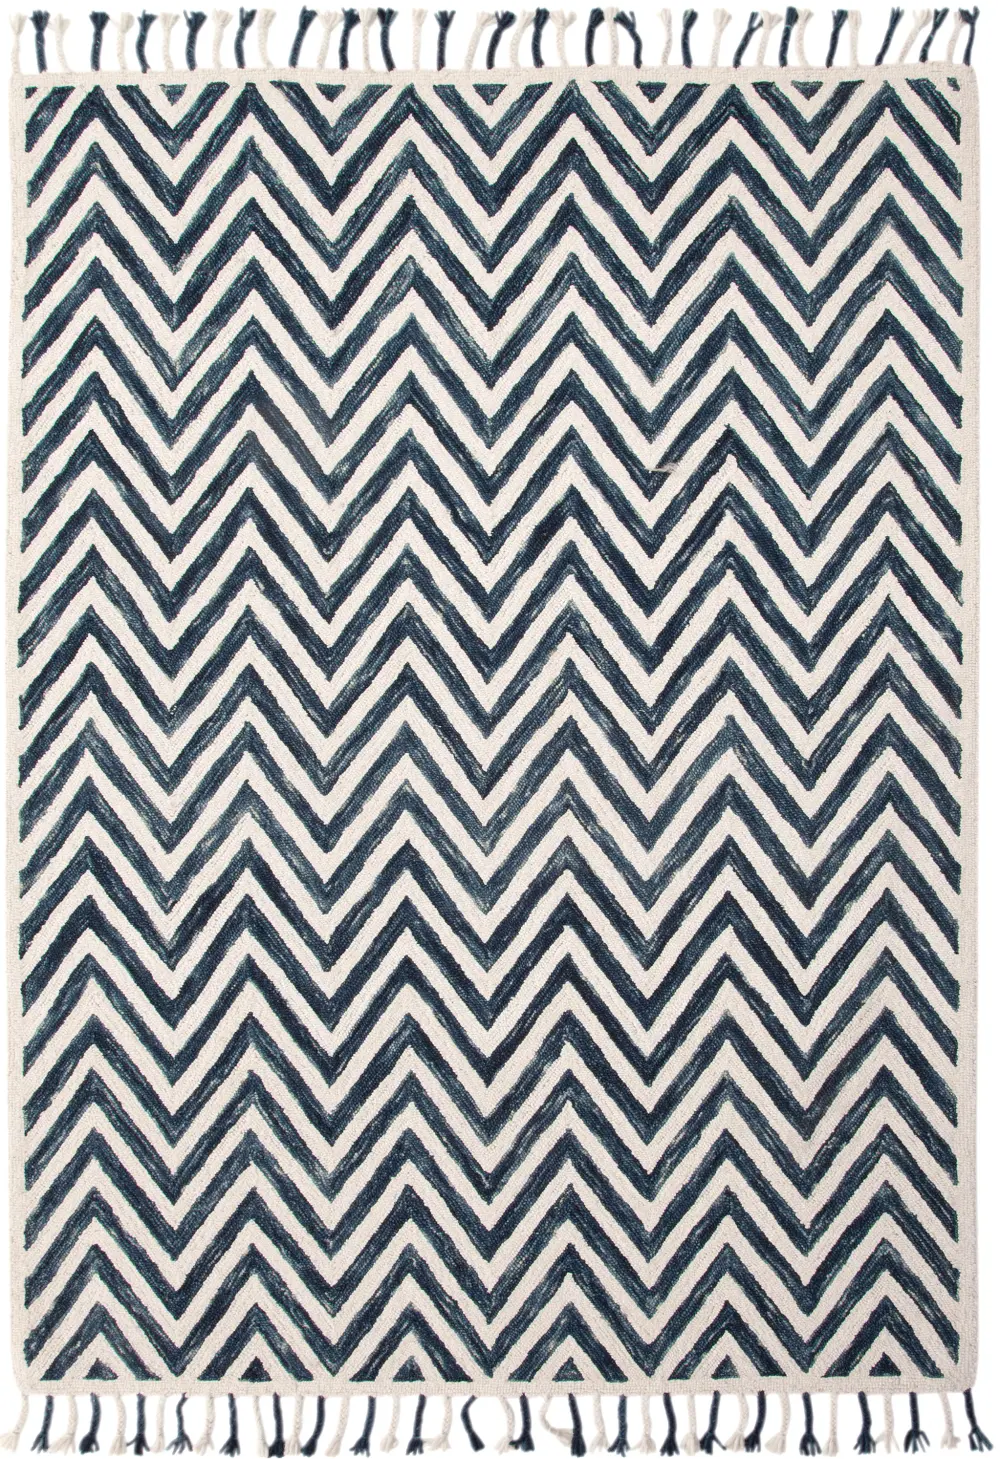 5 x 8 Medium White and Navy Blue Rug - Lily-1